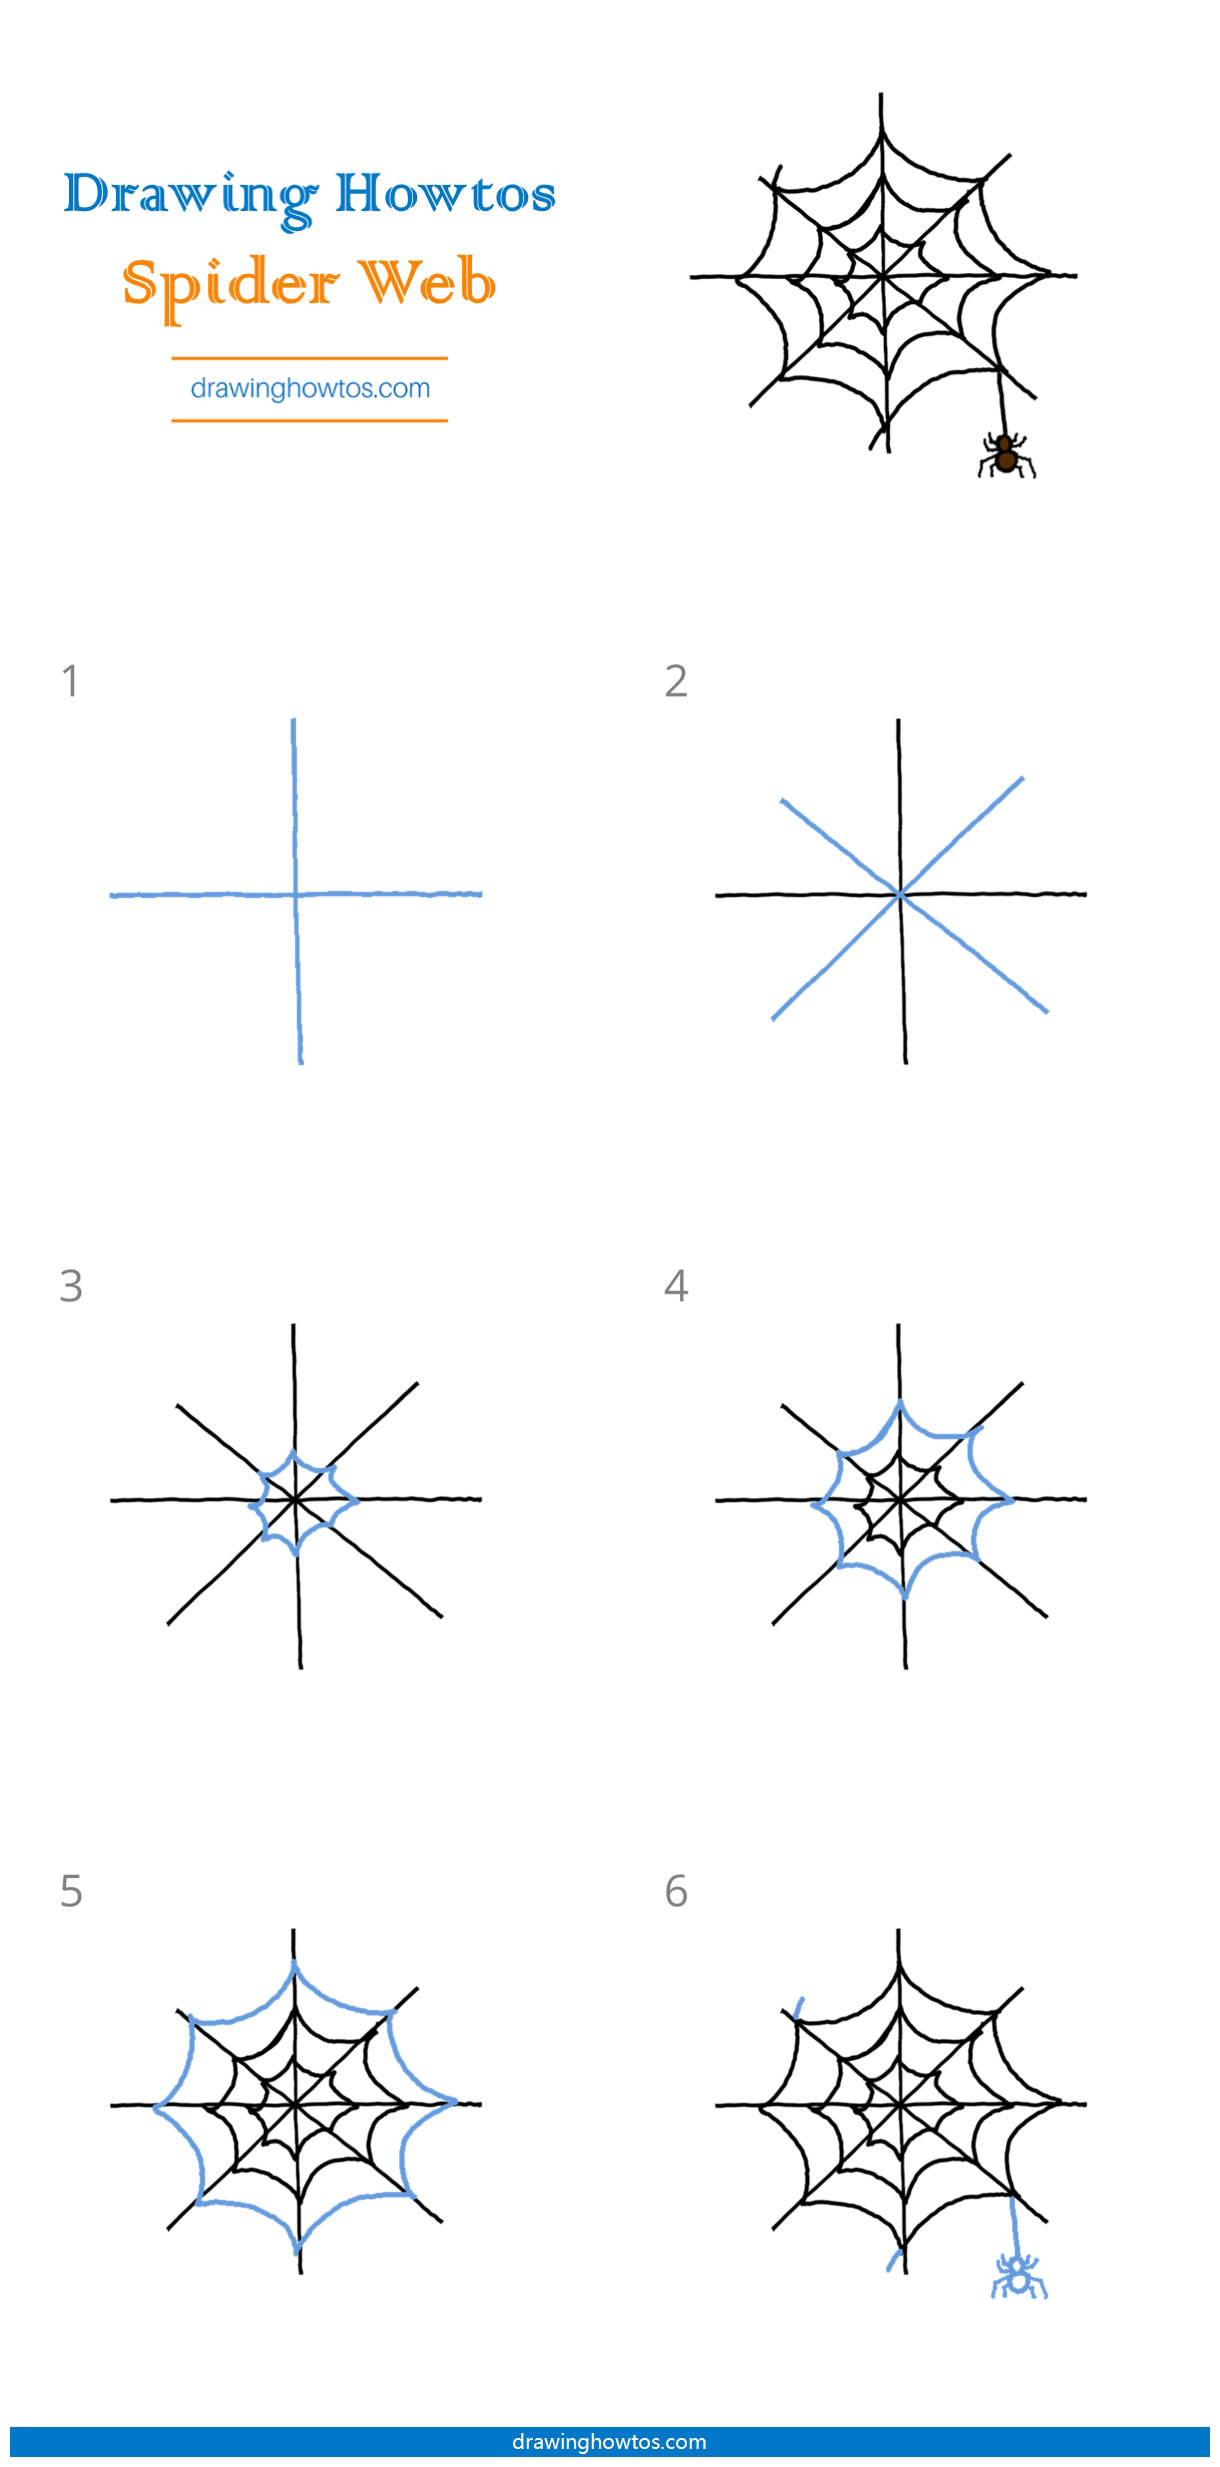 How to Draw a Spider Web Step by Step Easy Drawing Guides Drawing